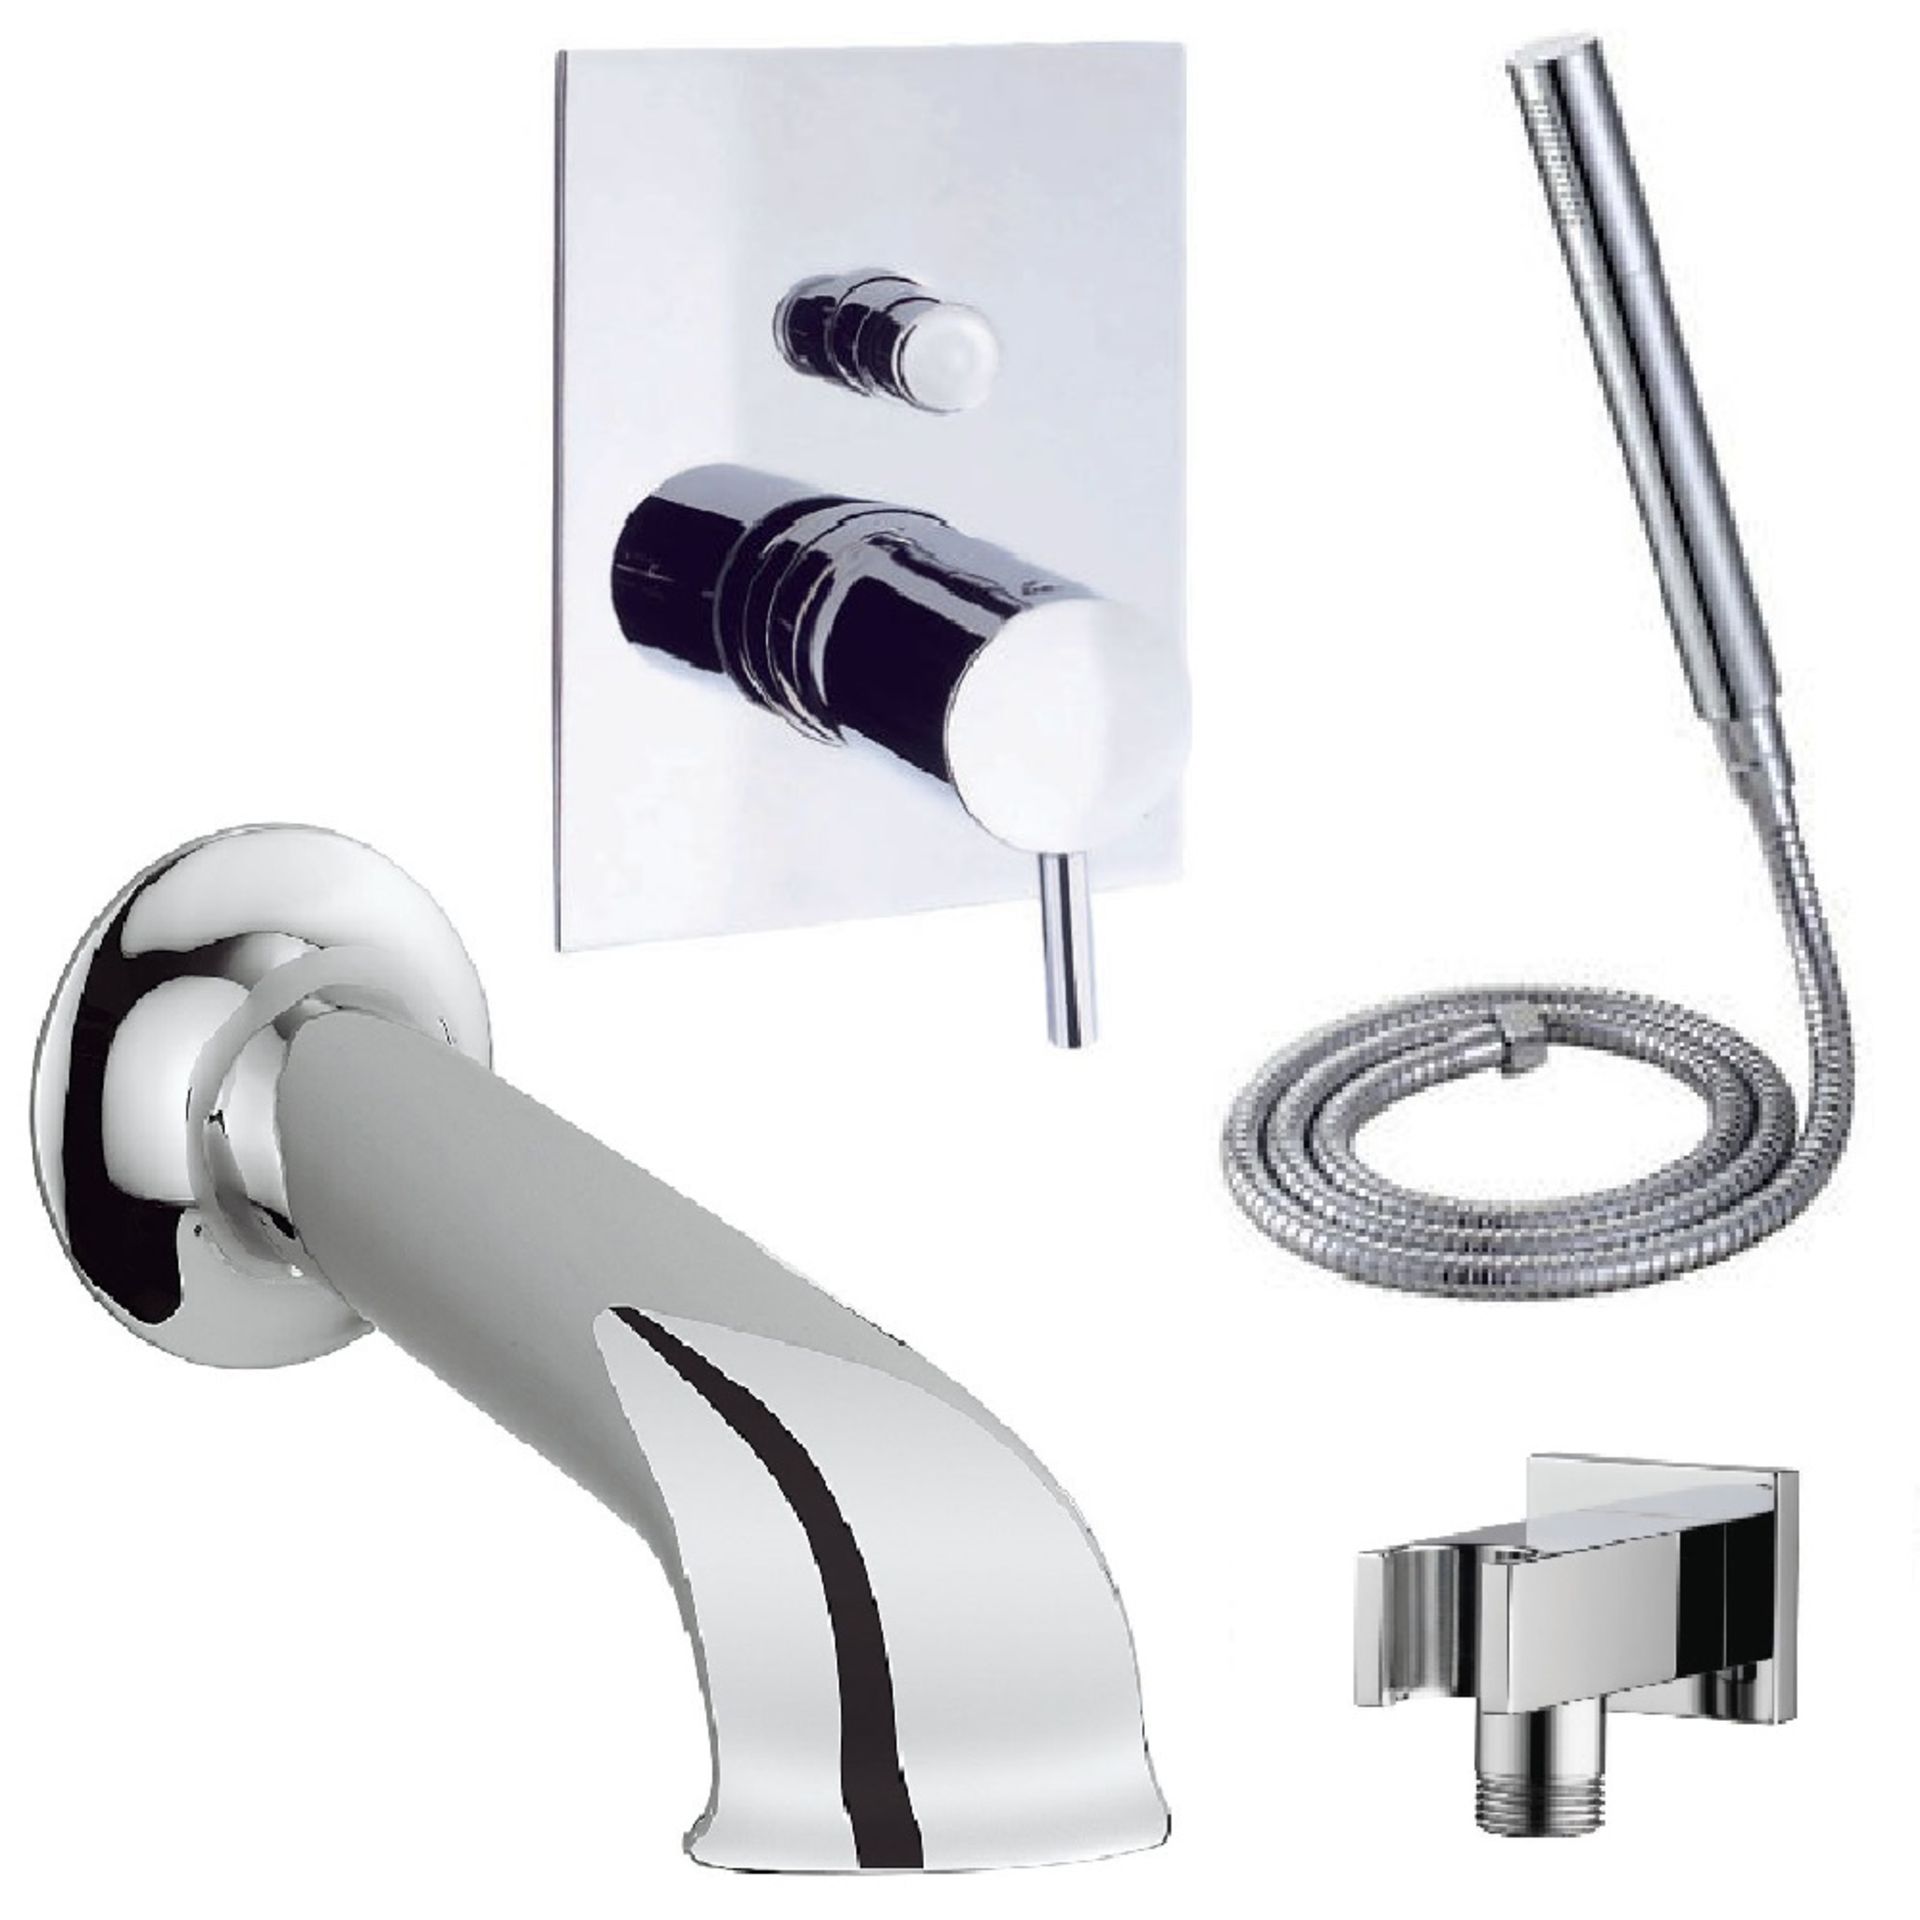 Wall mounted bath shower mixer kit with